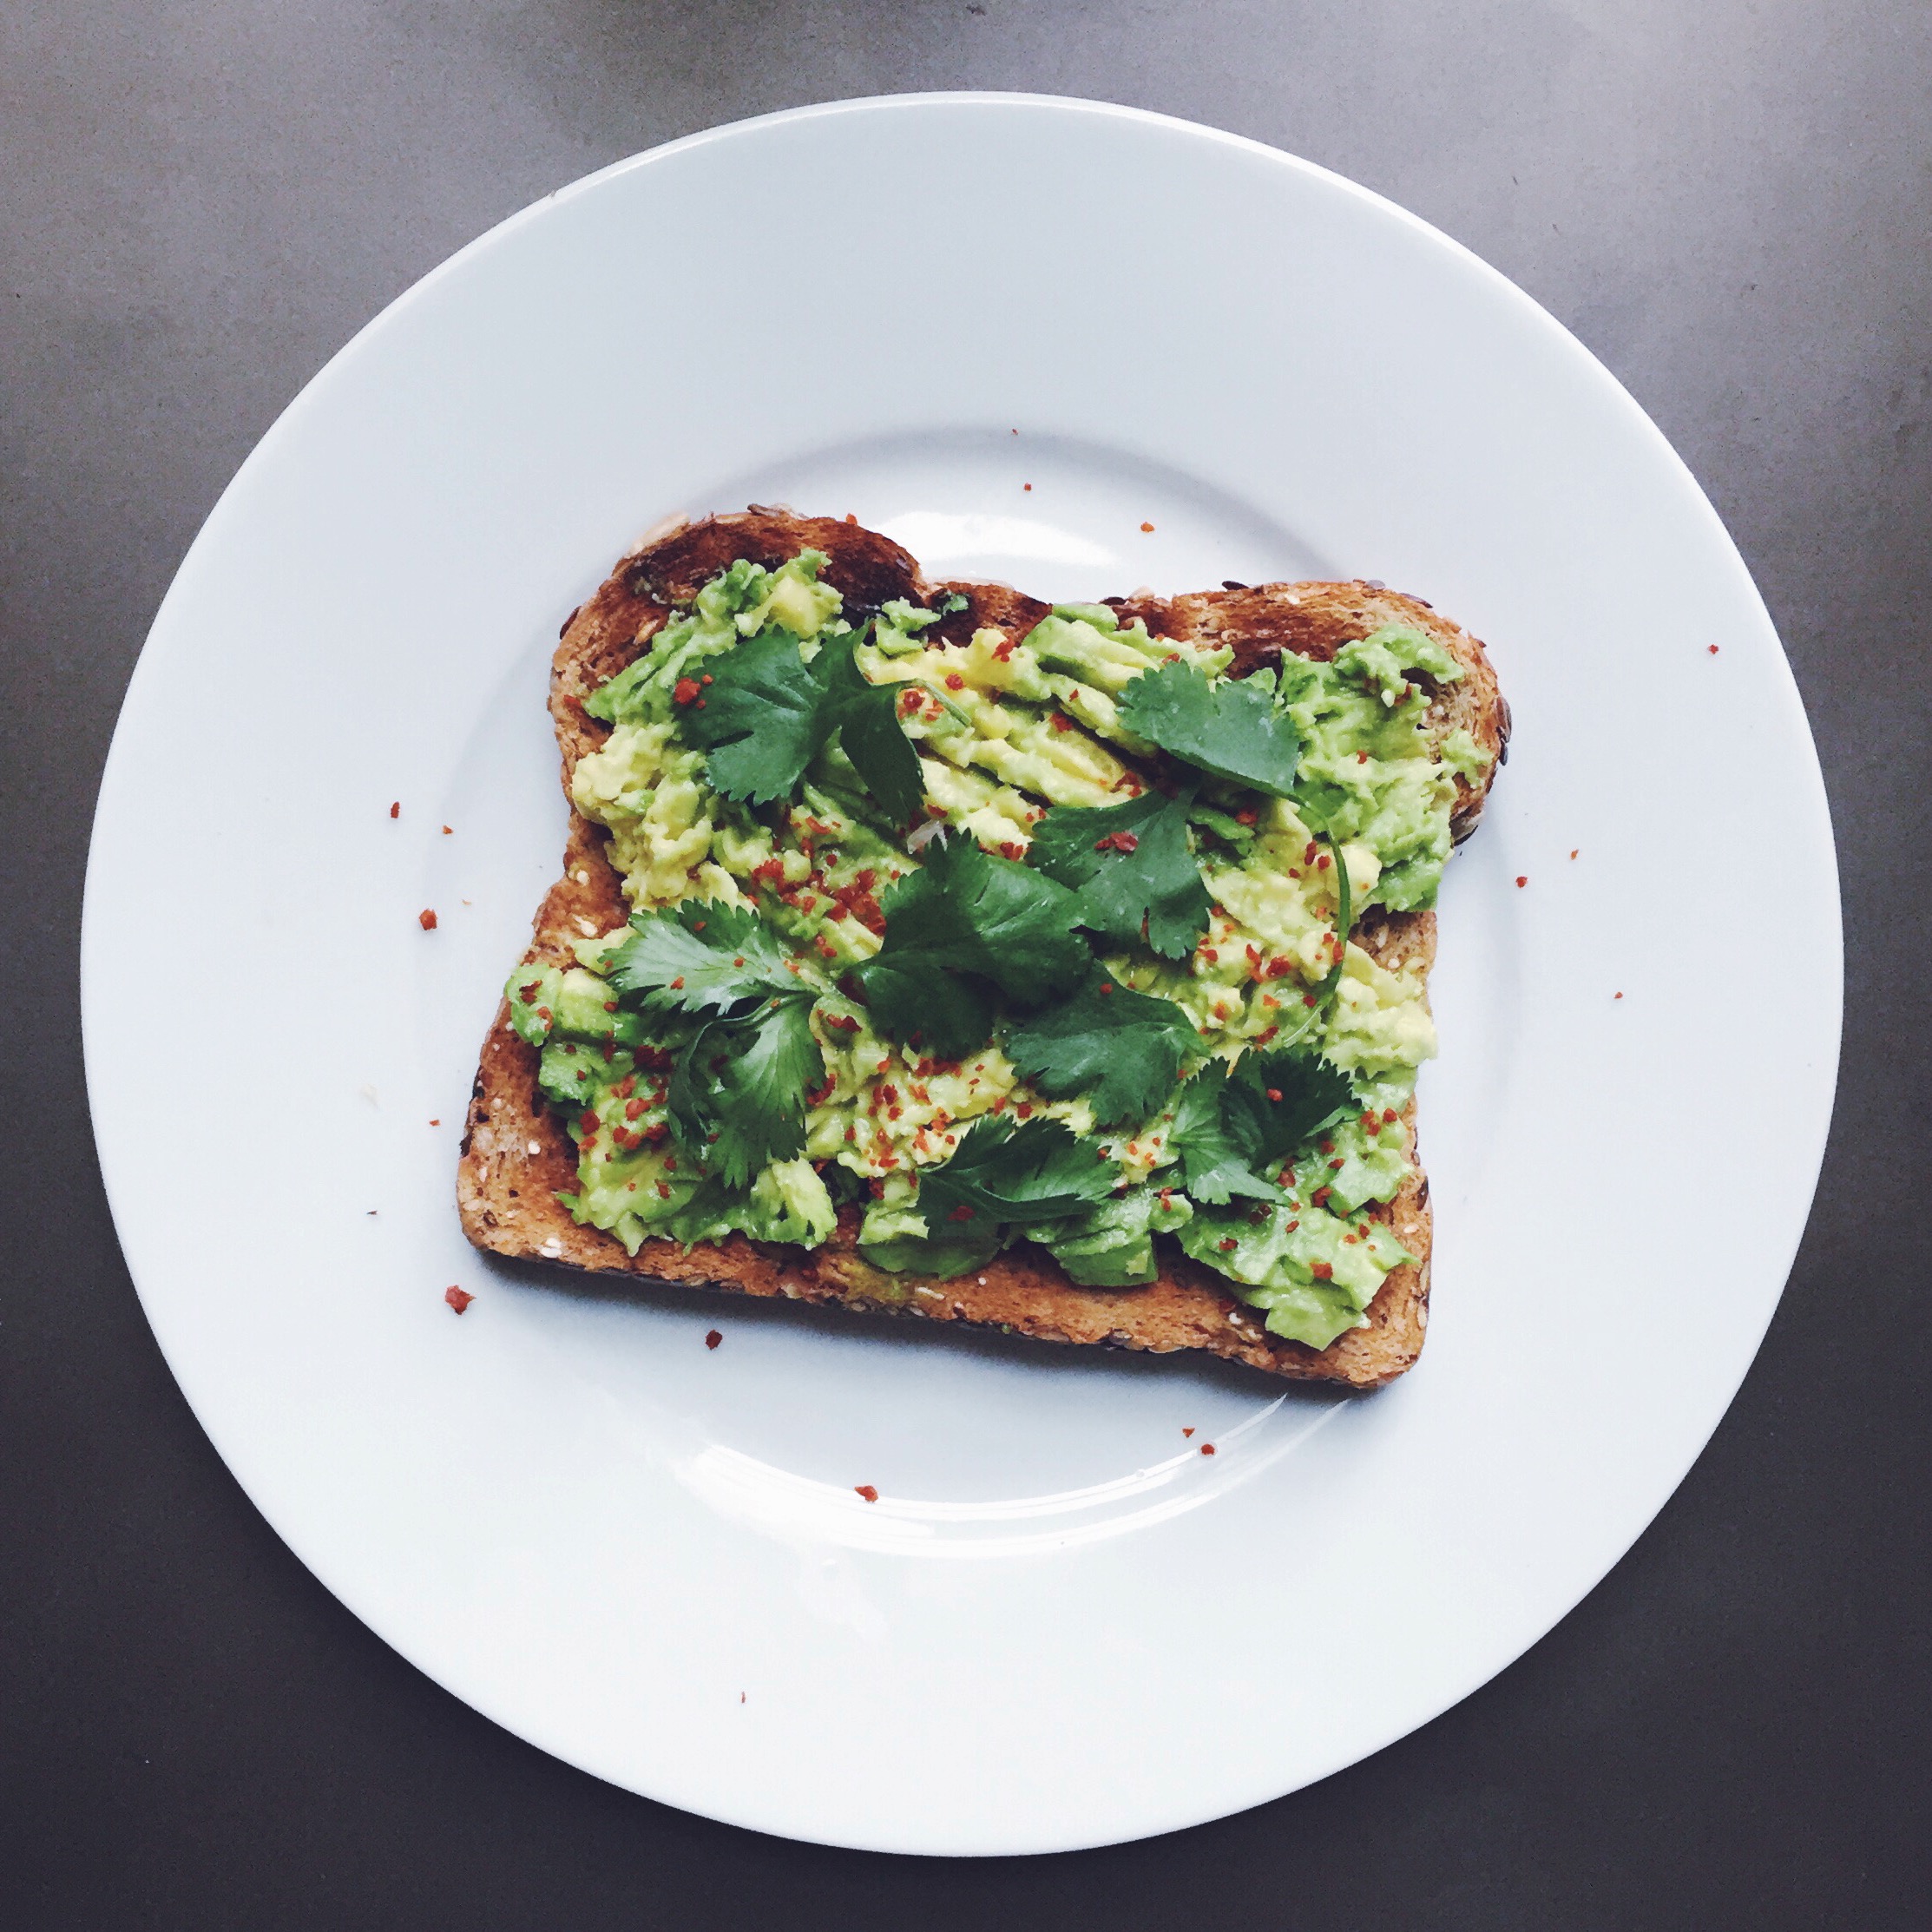 The Daily Toast - Breakfast, Lunch, and Dinner Inspiration